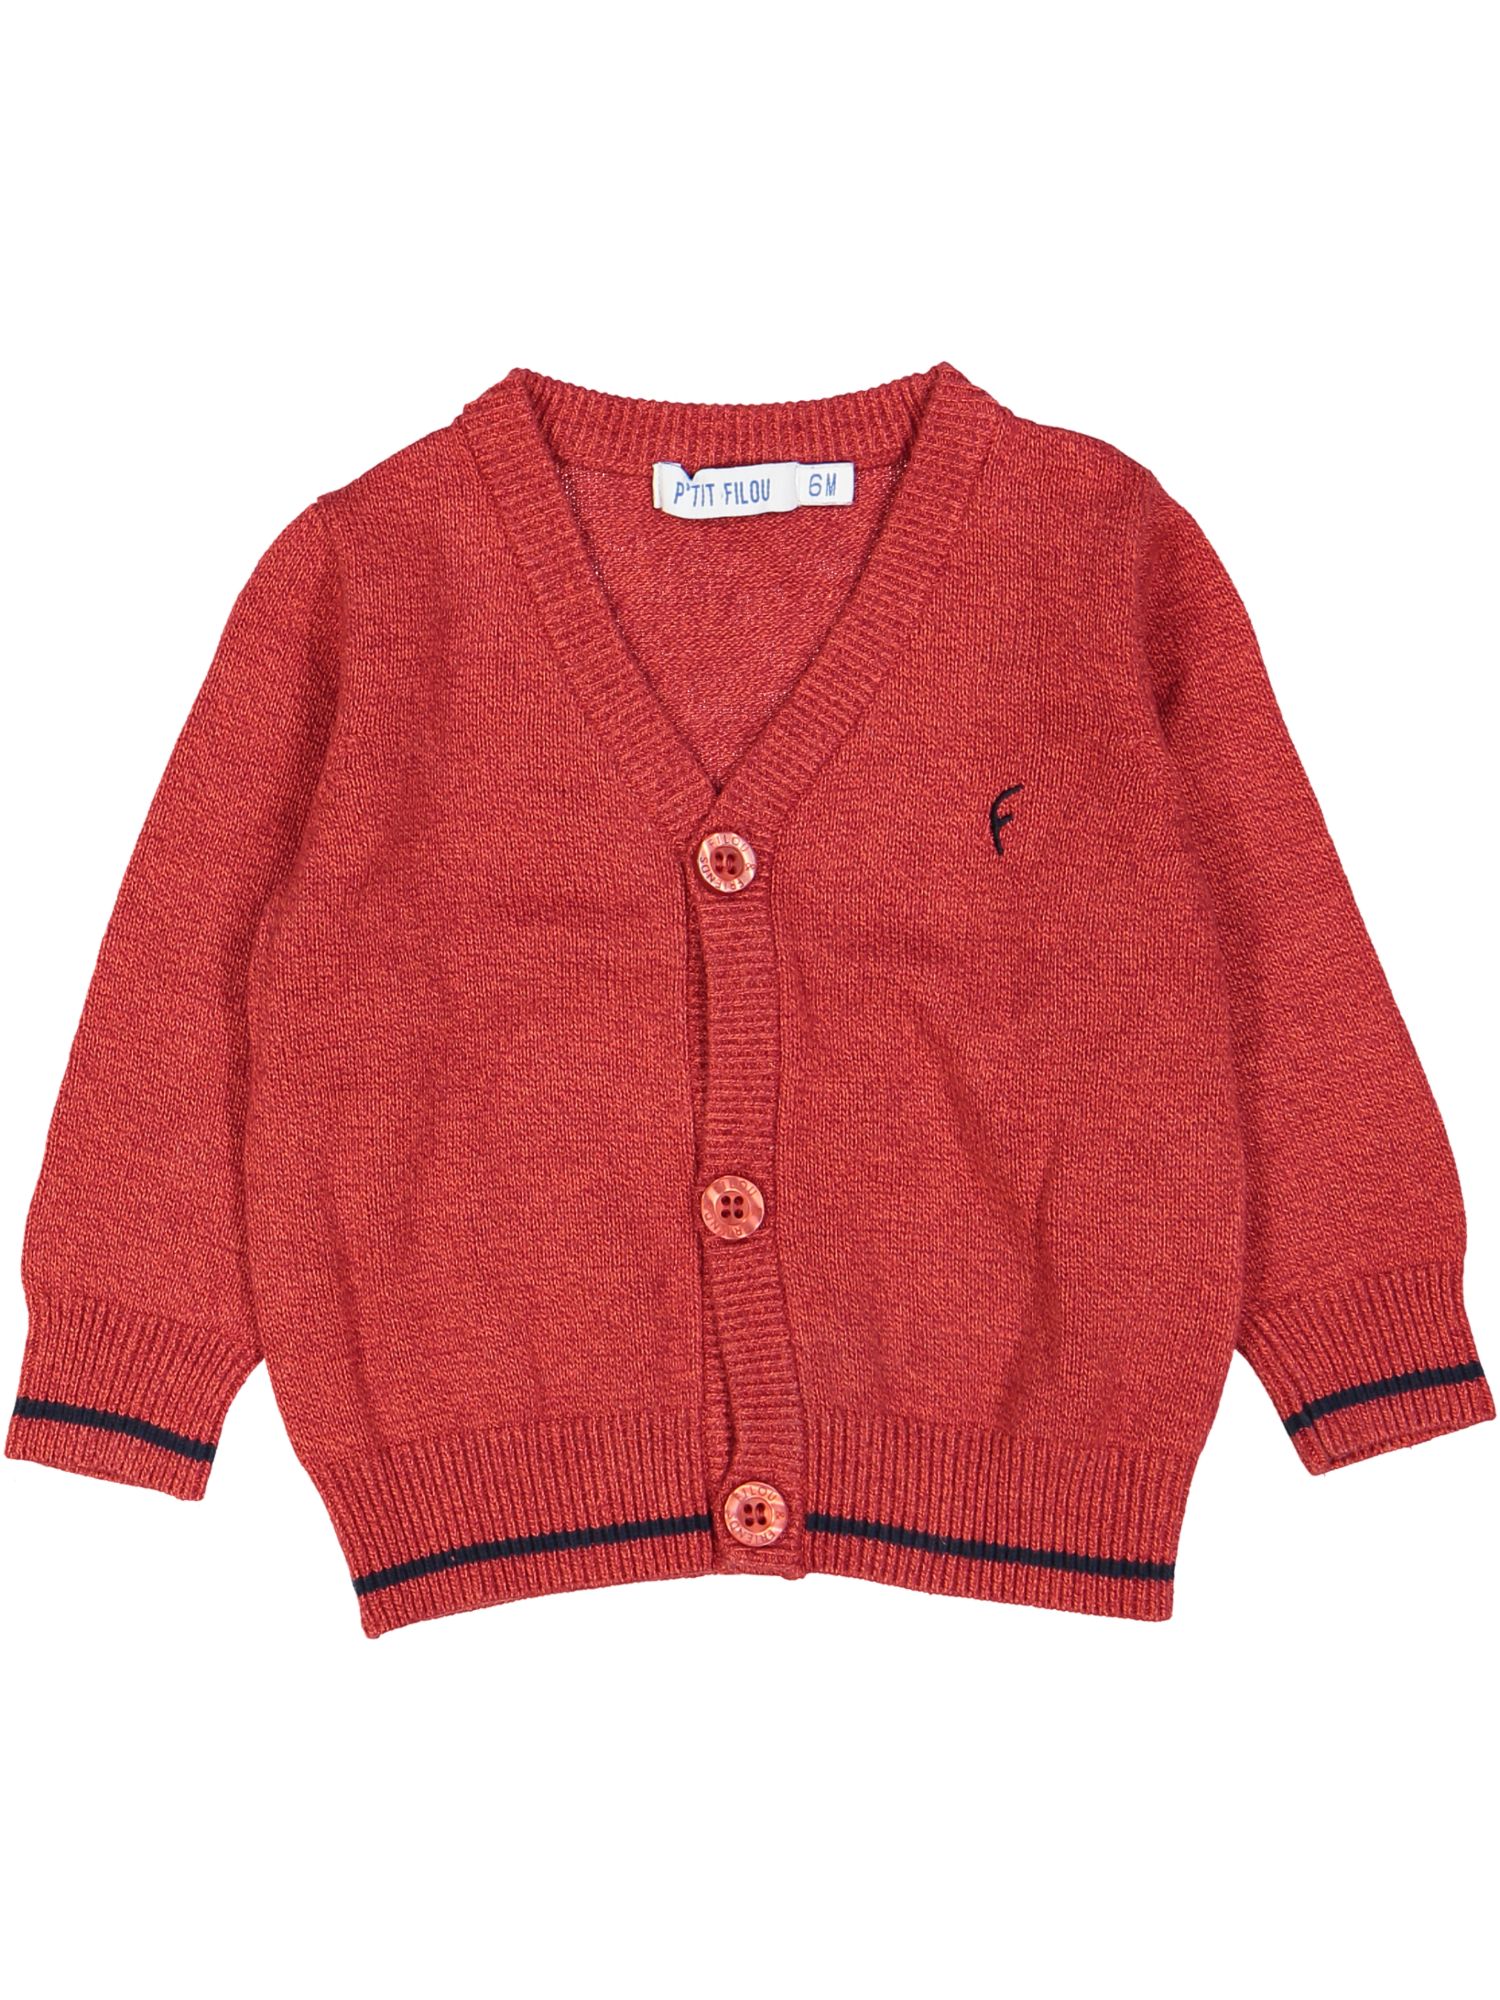 gilet tricot rood effen 06m .